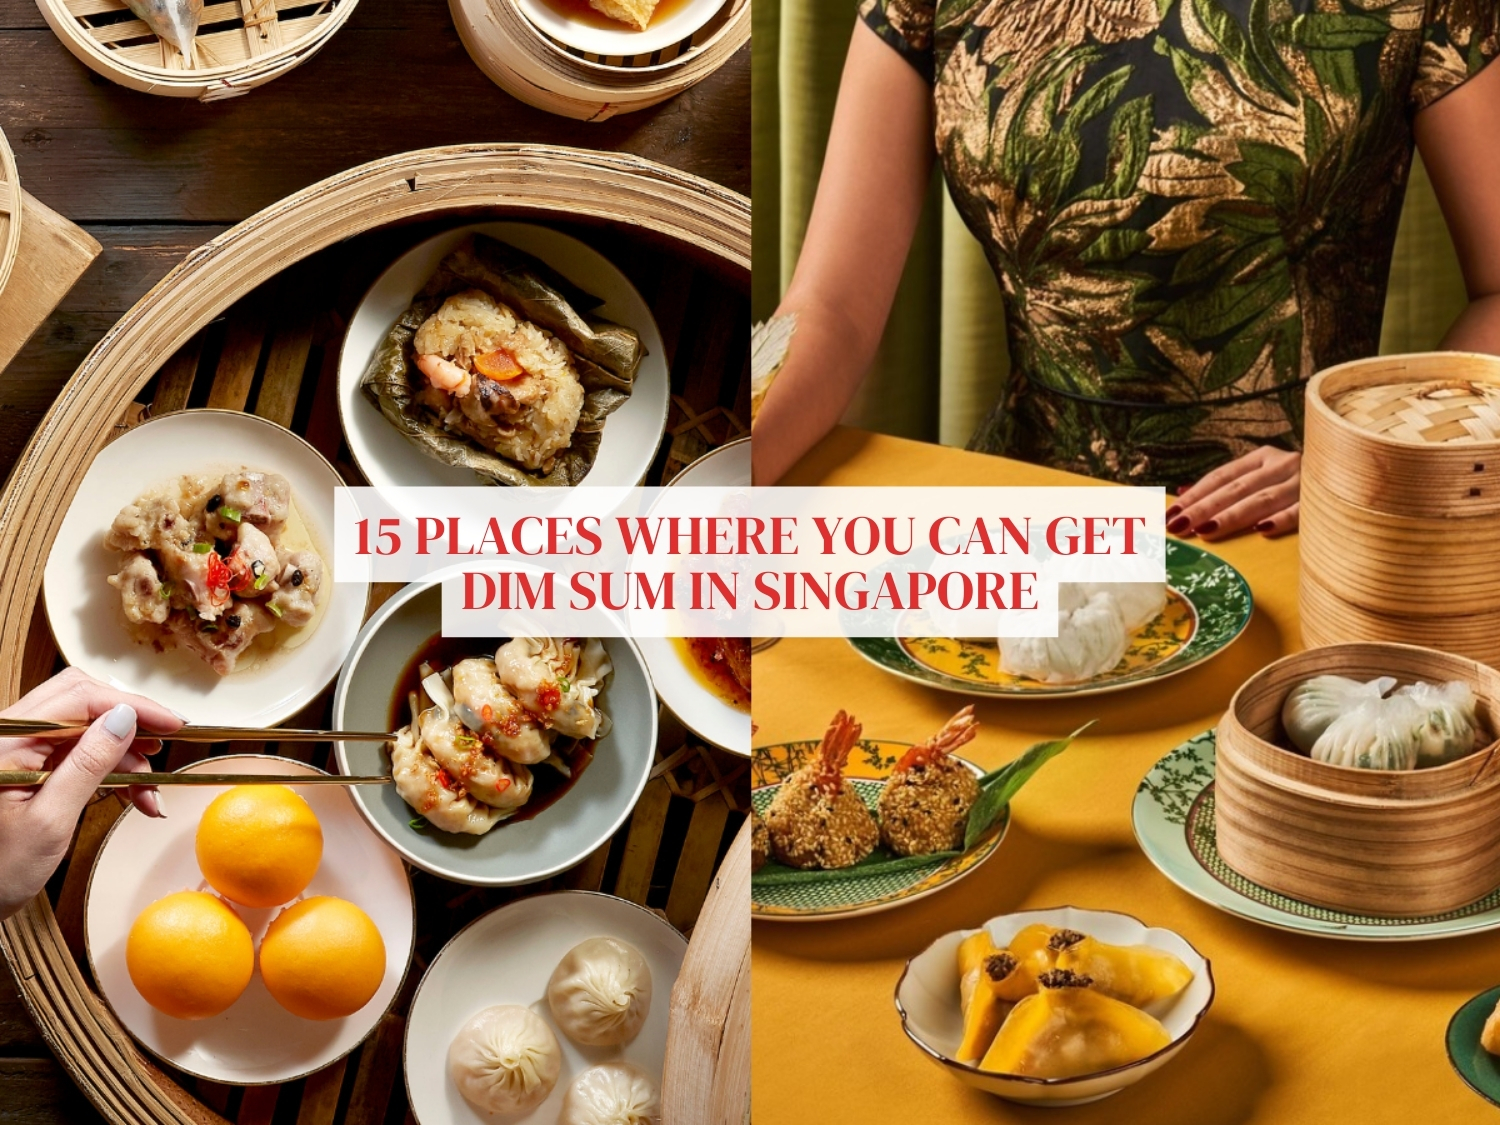 15 restaurants for the best dim sum in Singapore to yum cha at